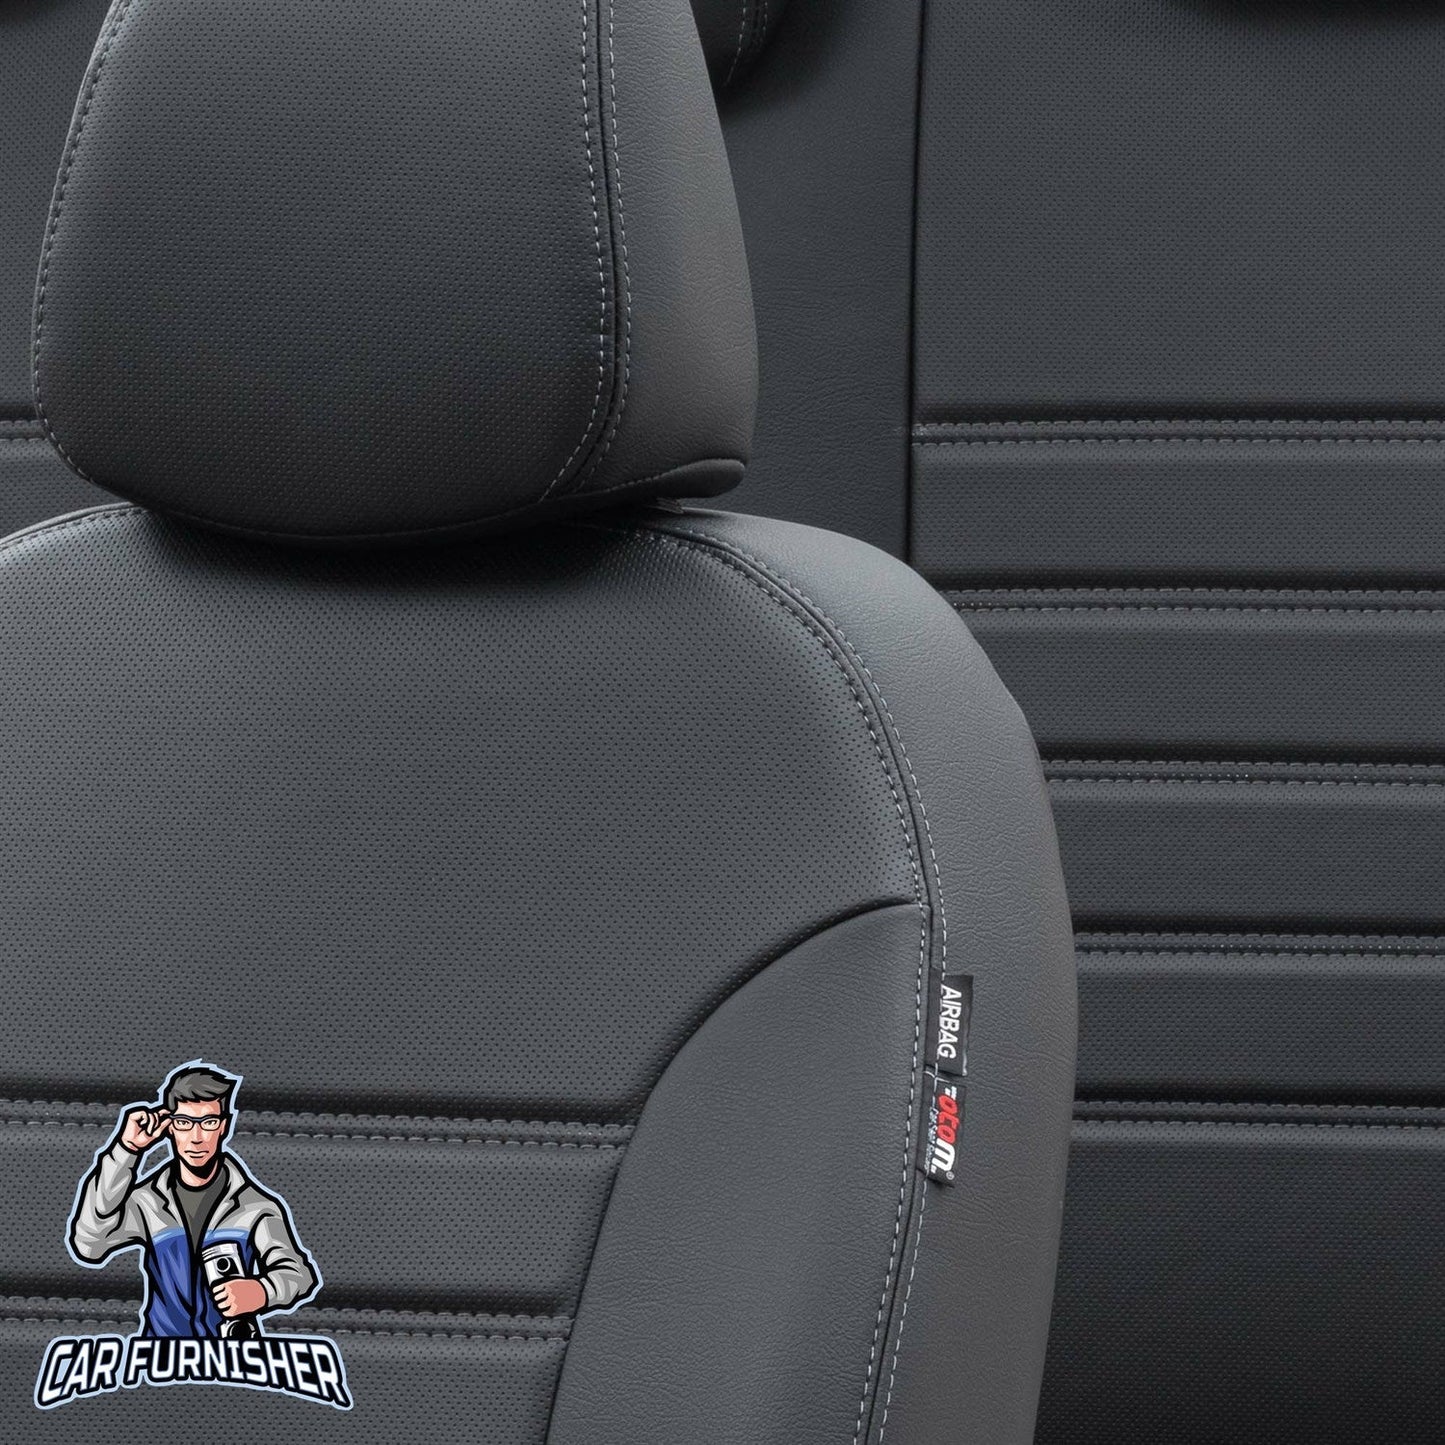 Hyundai Getz Seat Covers Istanbul Leather Design Black Leather